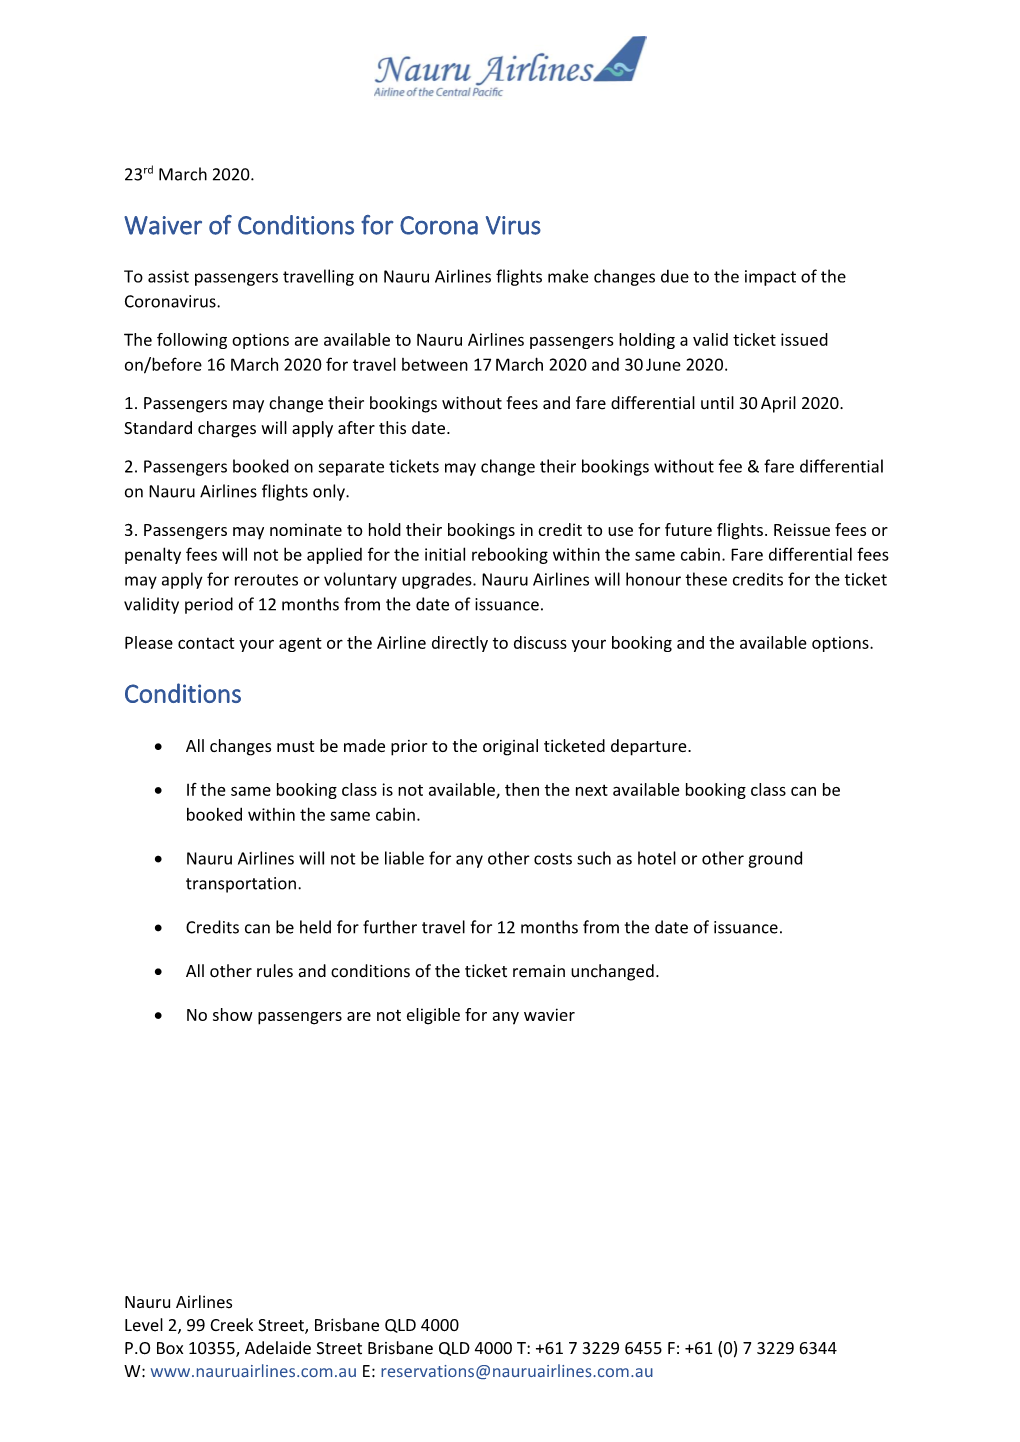 Waiver of Conditions for Corona Virus Conditions